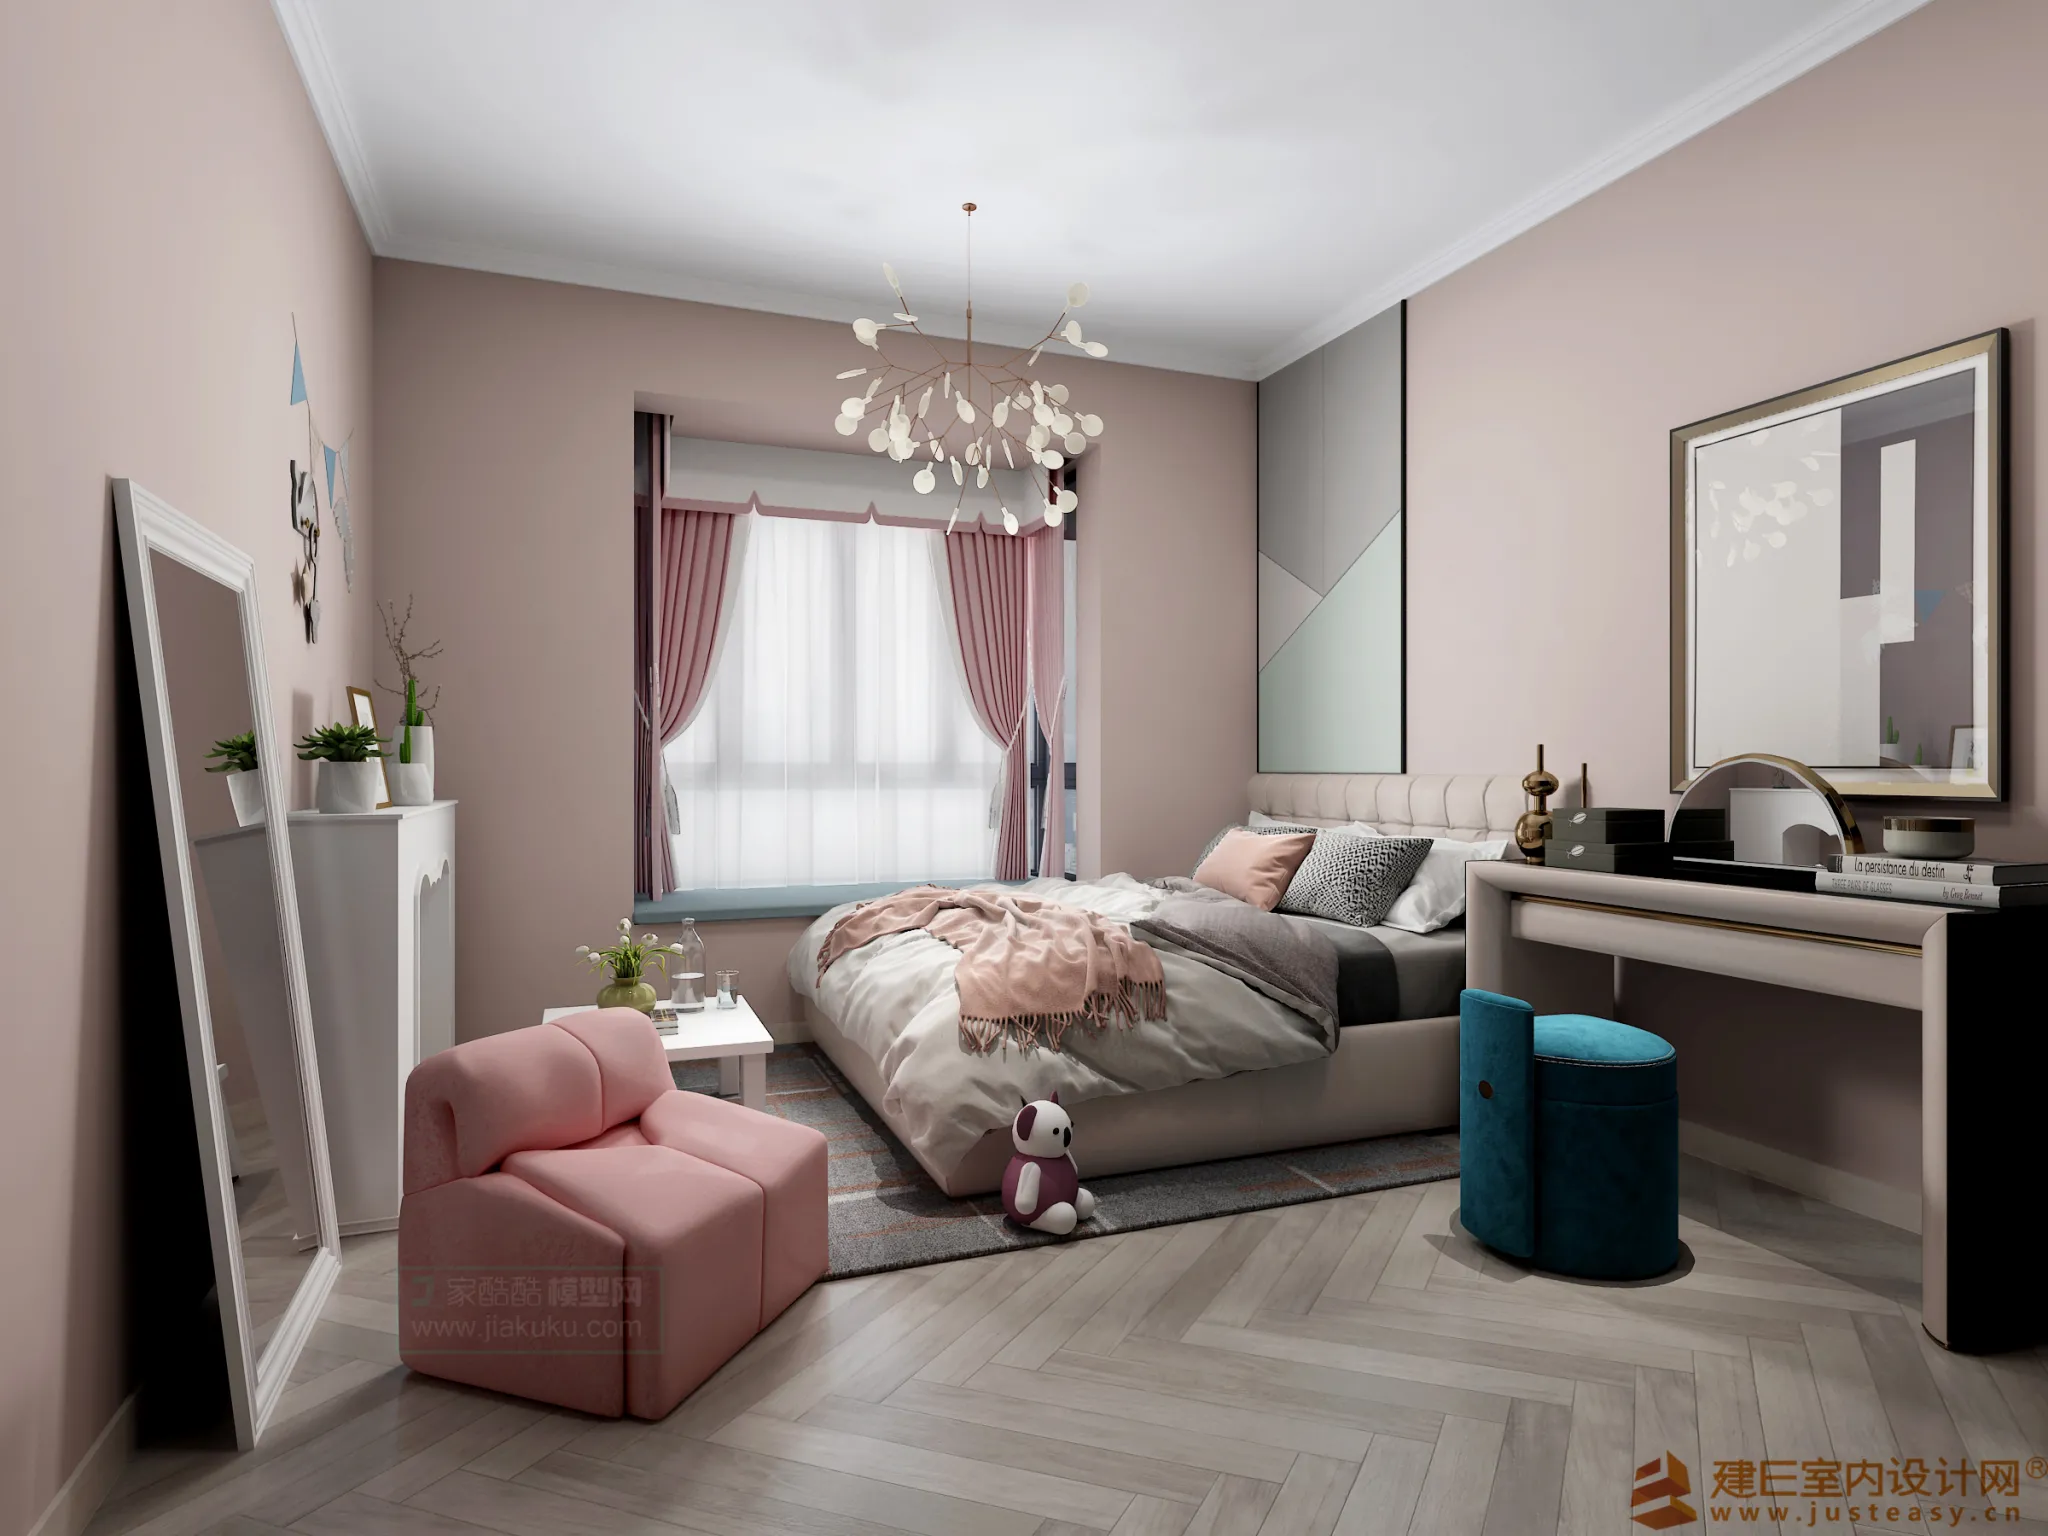 Justeasy 20 – House Space – 03 – BEDROOM – Z14